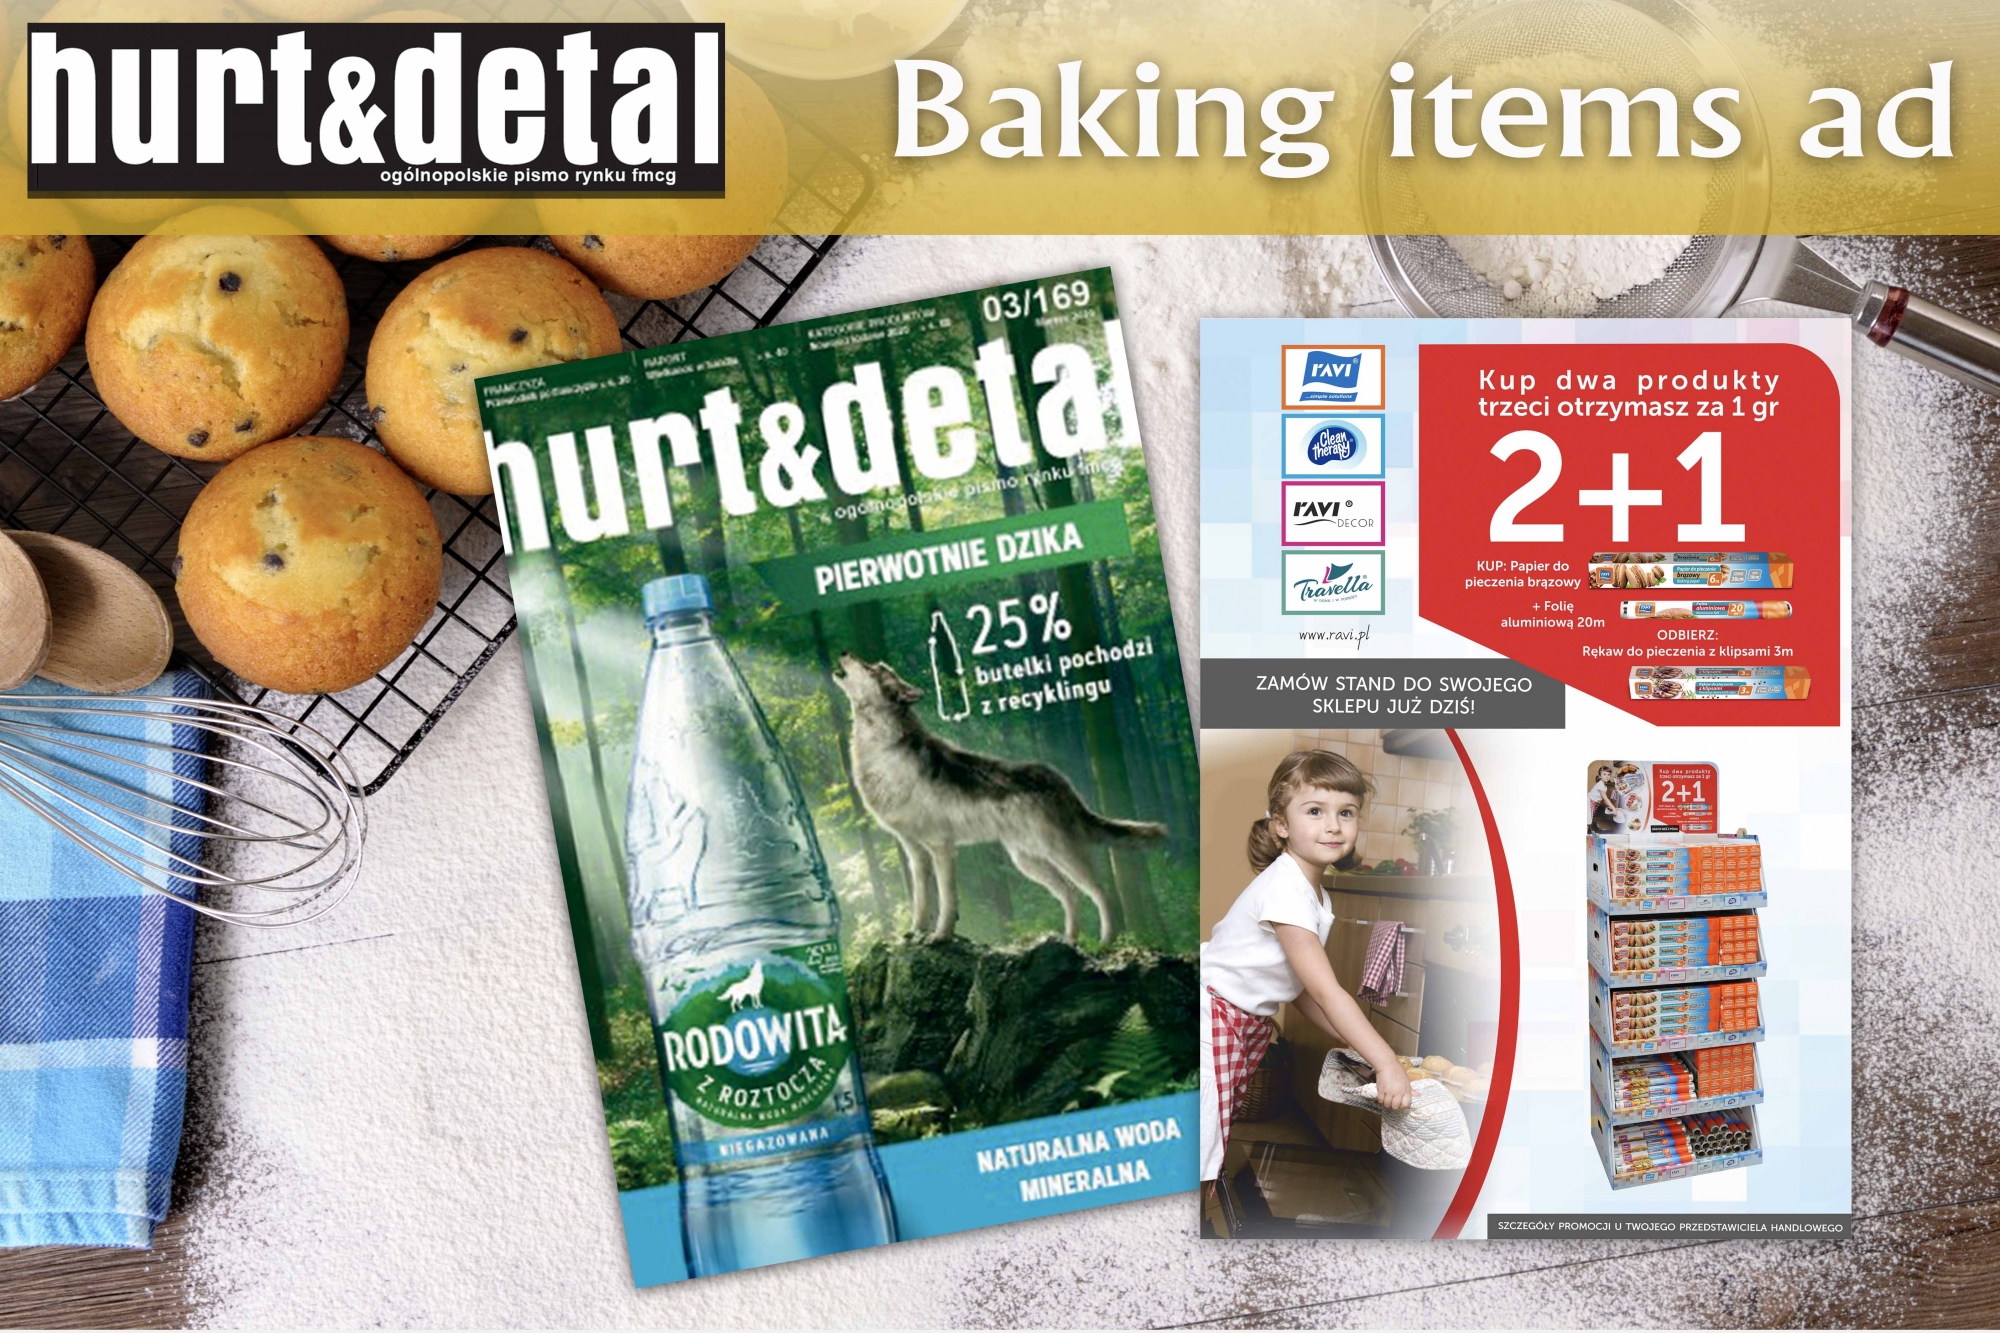 March 2020 Baking items ad.